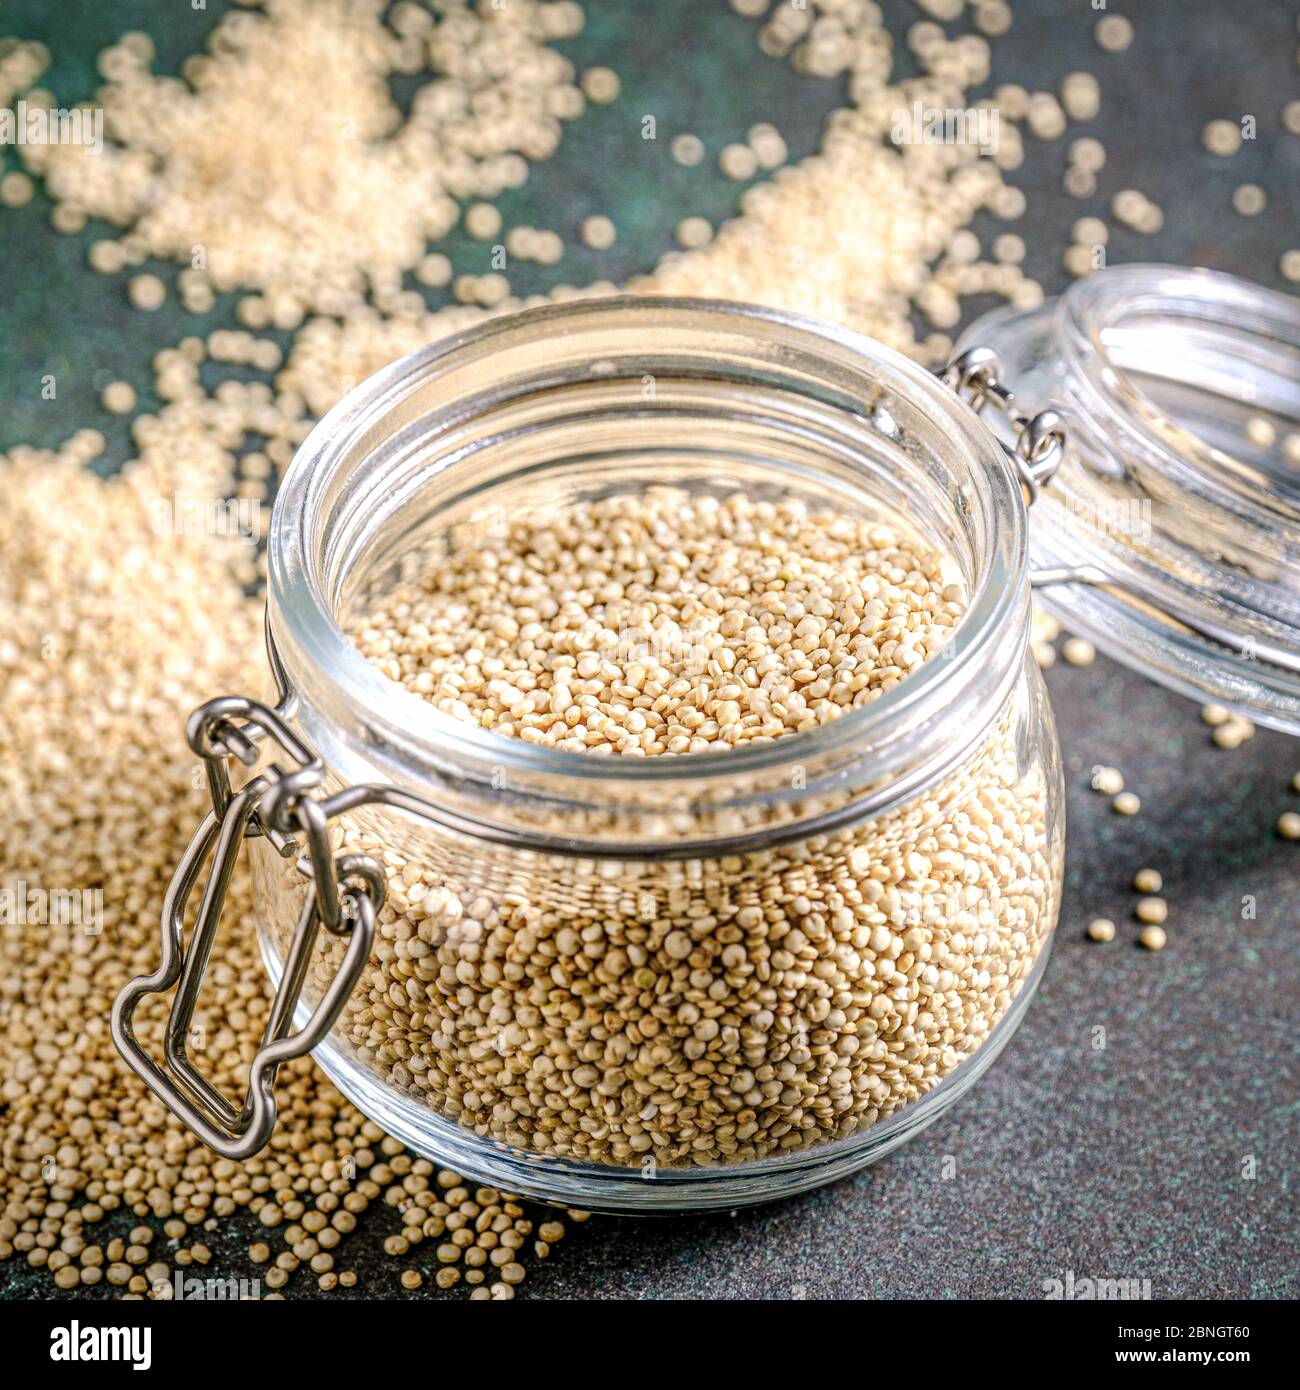 White raw quinoa in glass jar on green rustic background. Stock Photo